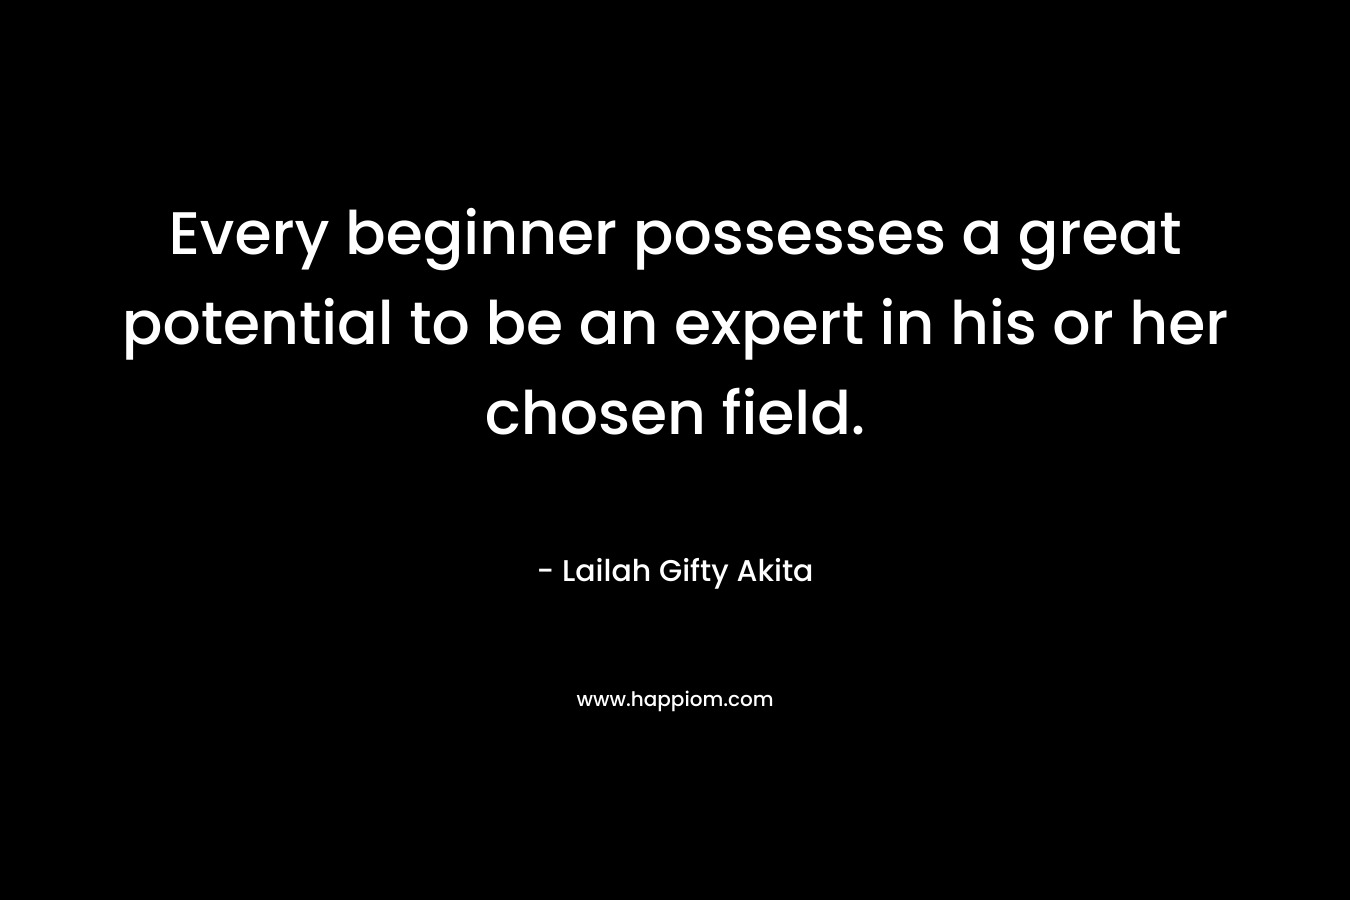 Every beginner possesses a great potential to be an expert in his or her chosen field.